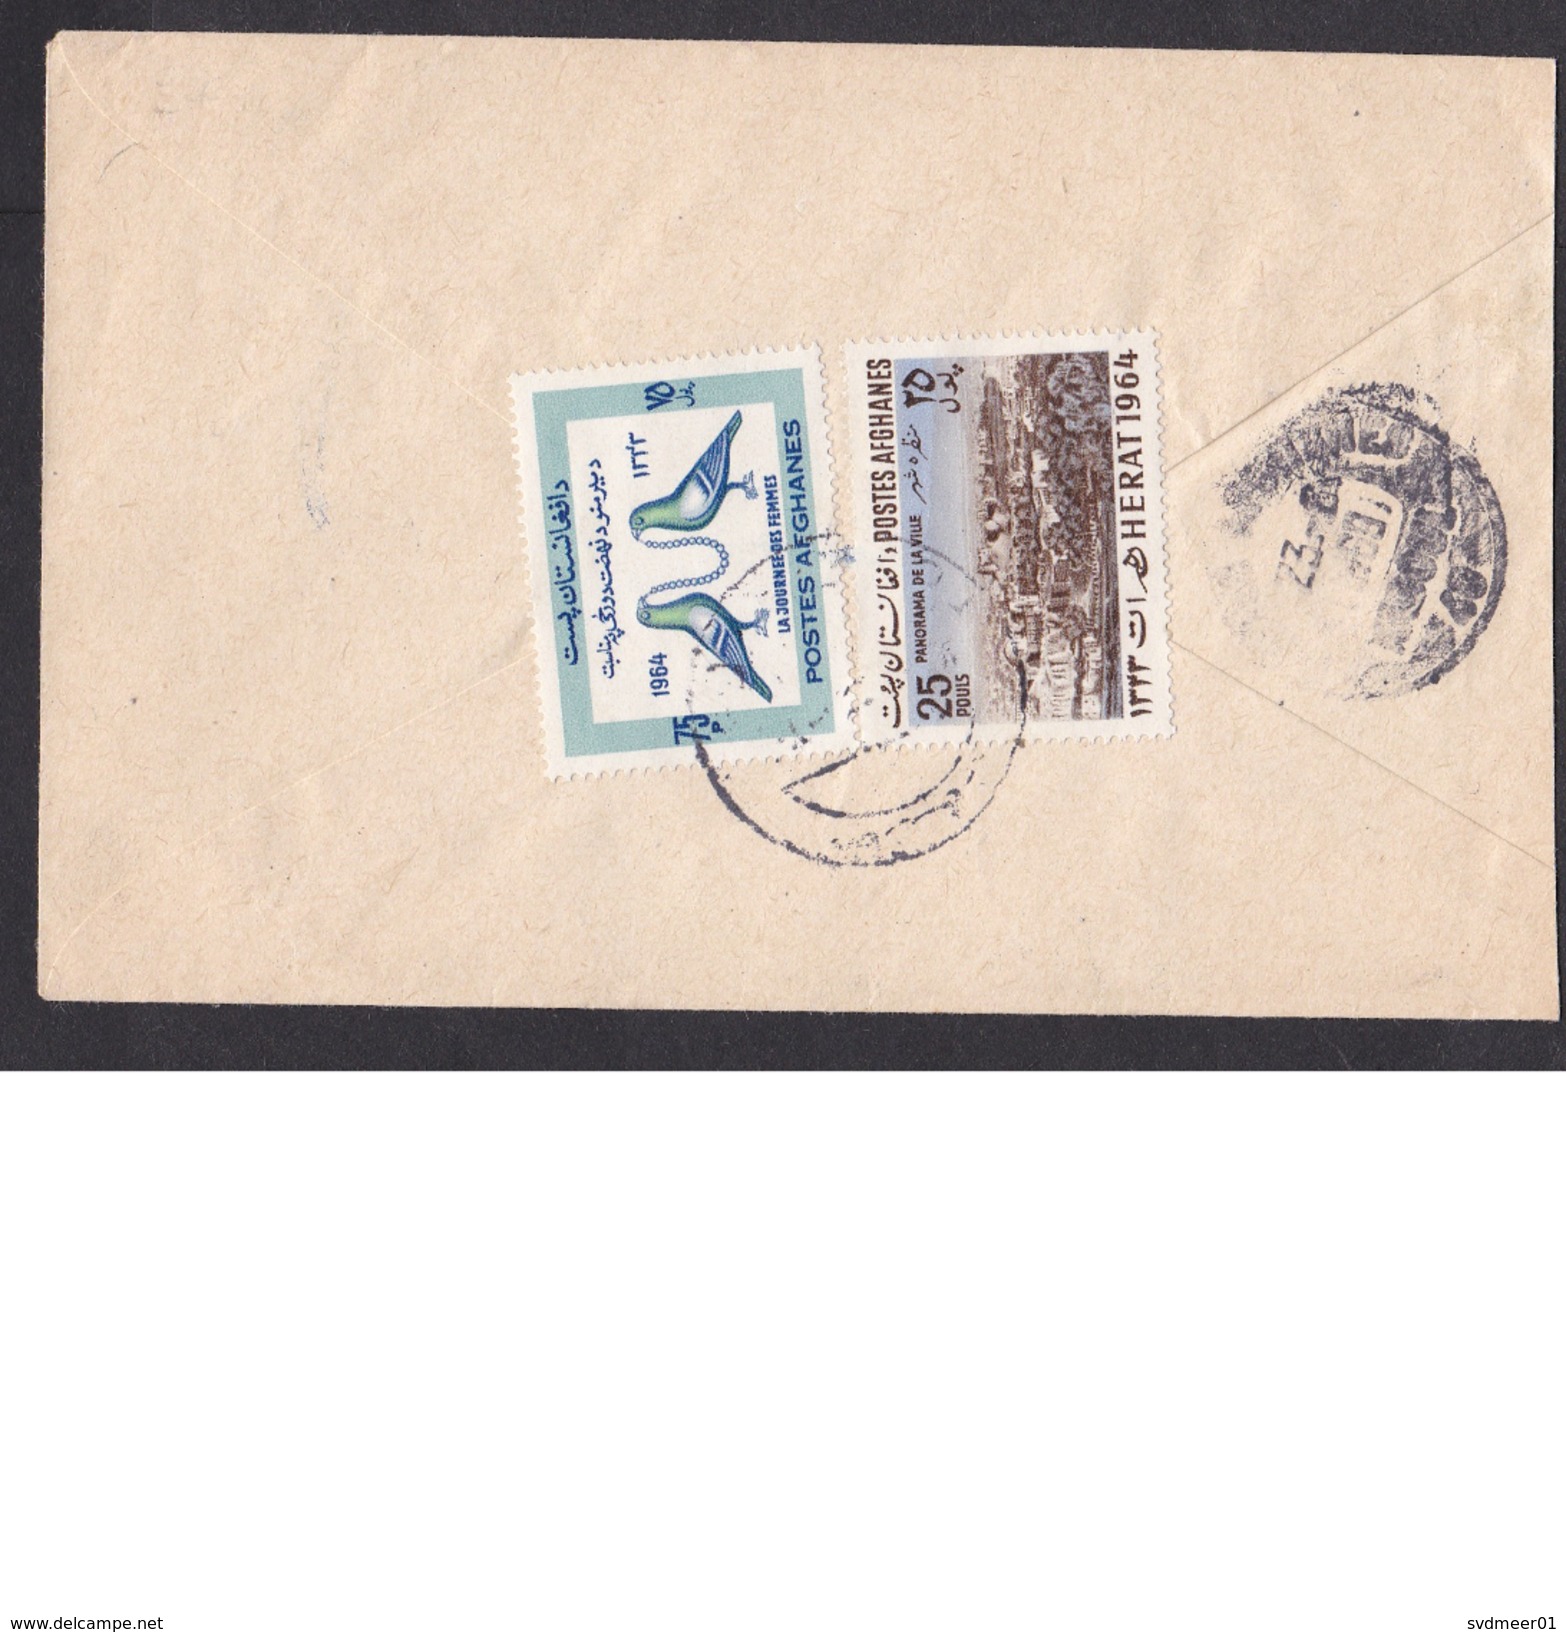 Afghanistan: Cover, 1969, 2 Stamps, Women's Day, Pigeon, Bird, Panorama Herat, Rare Real Use (traces Of Use) - Afghanistan